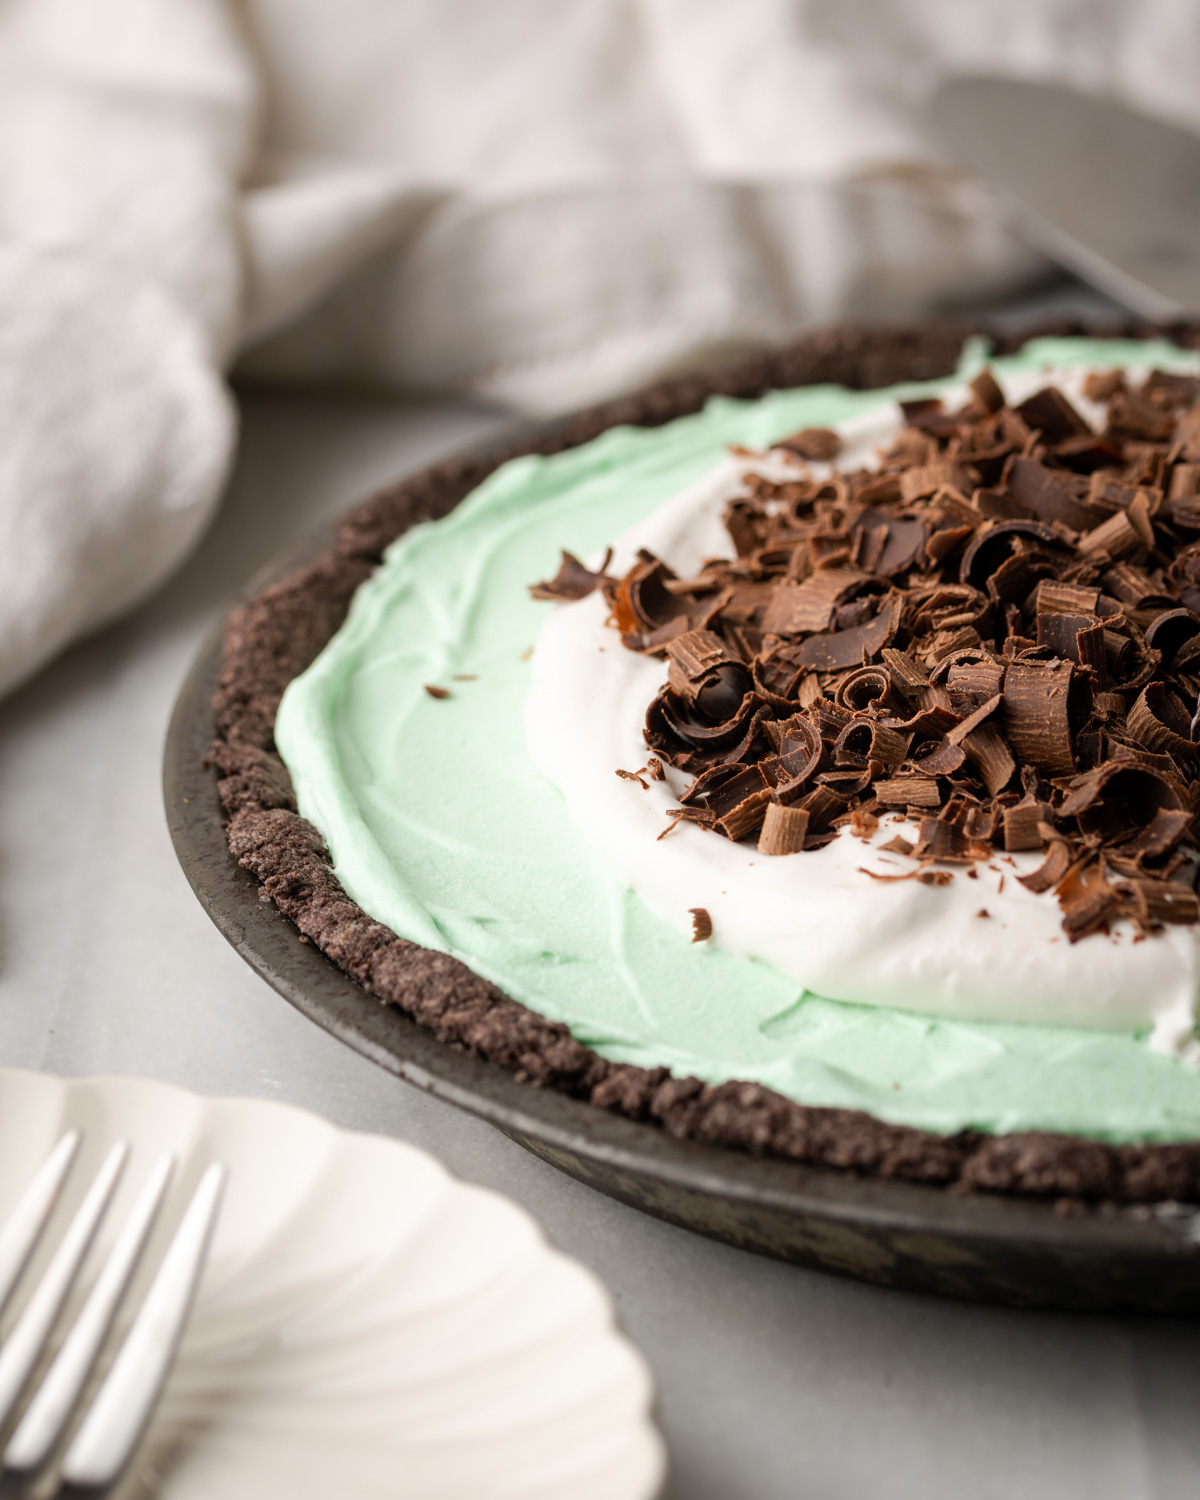 A mint pie with whipped cream and chocolate curls on top.